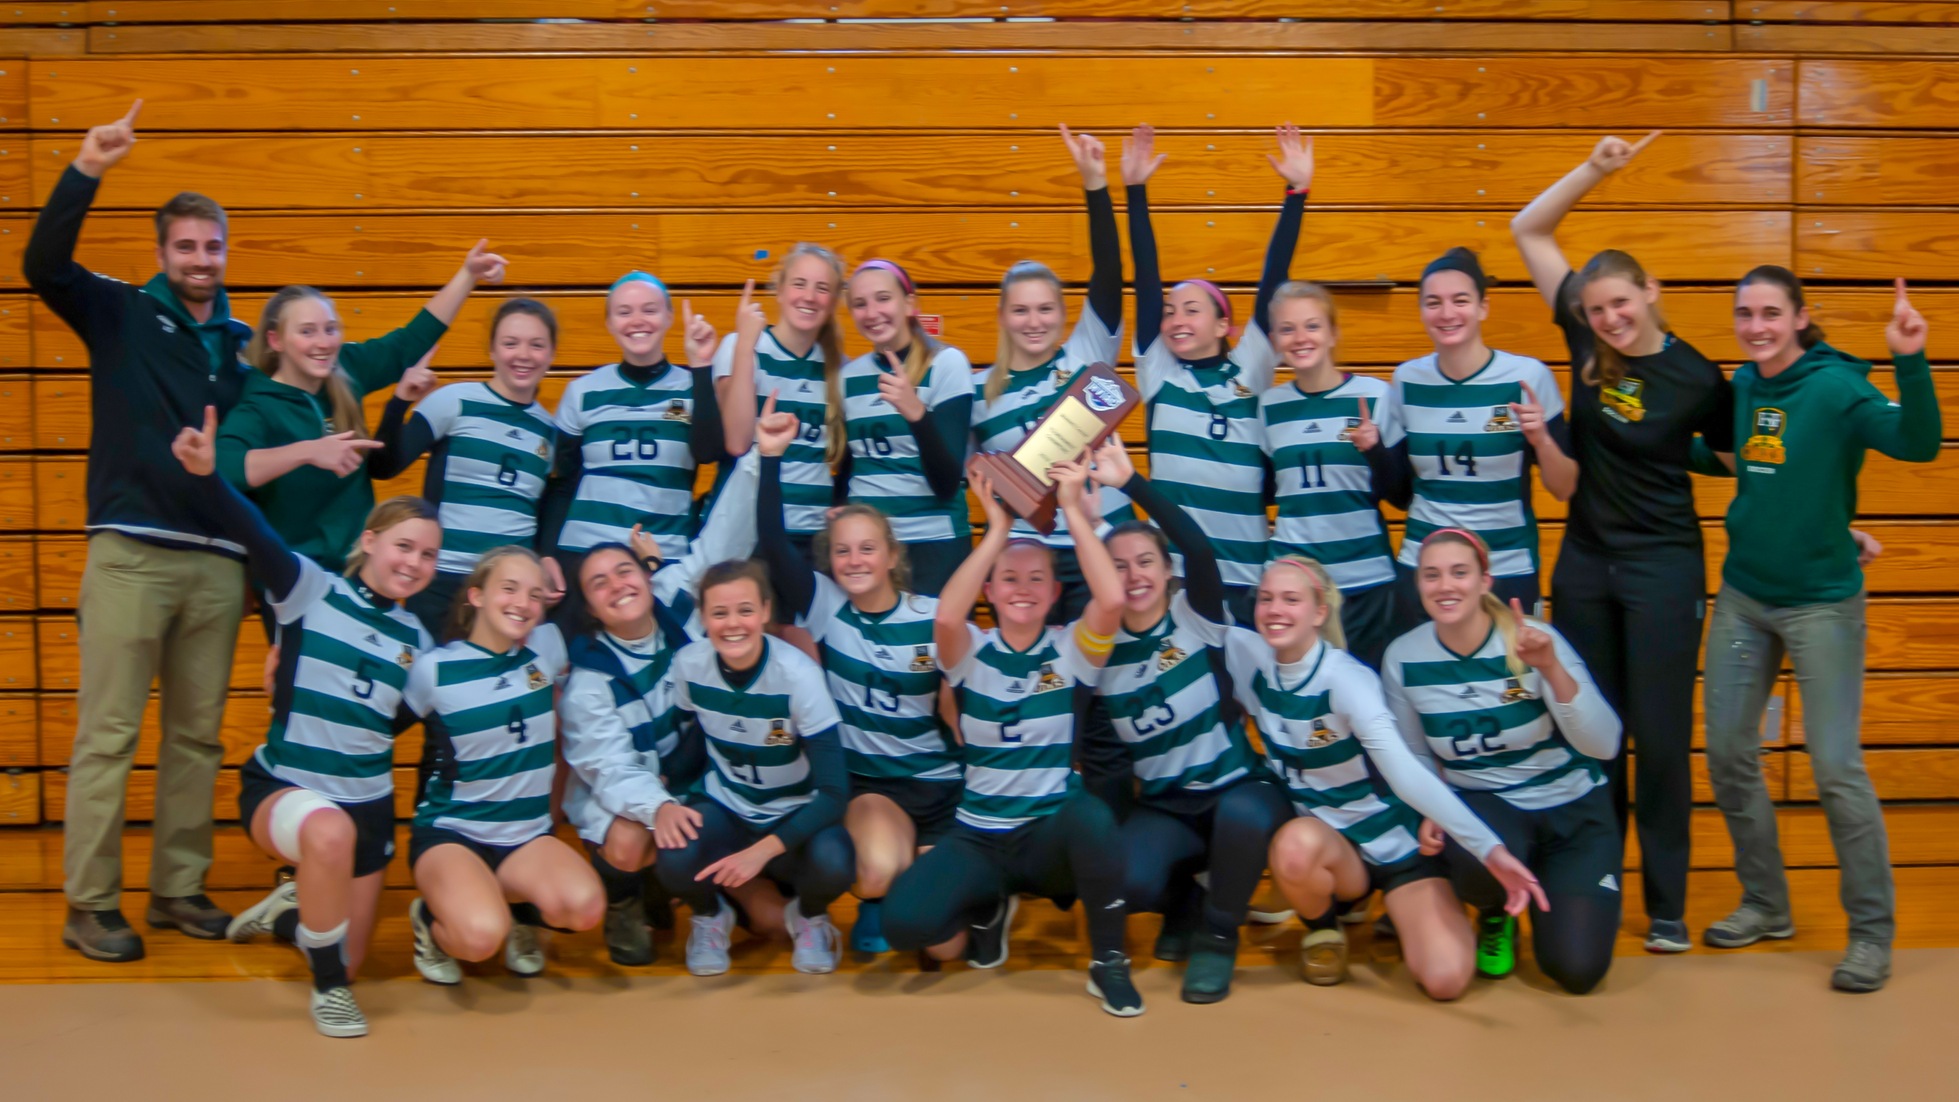 SUNY ESF Wins Third Straight Women's Soccer Title